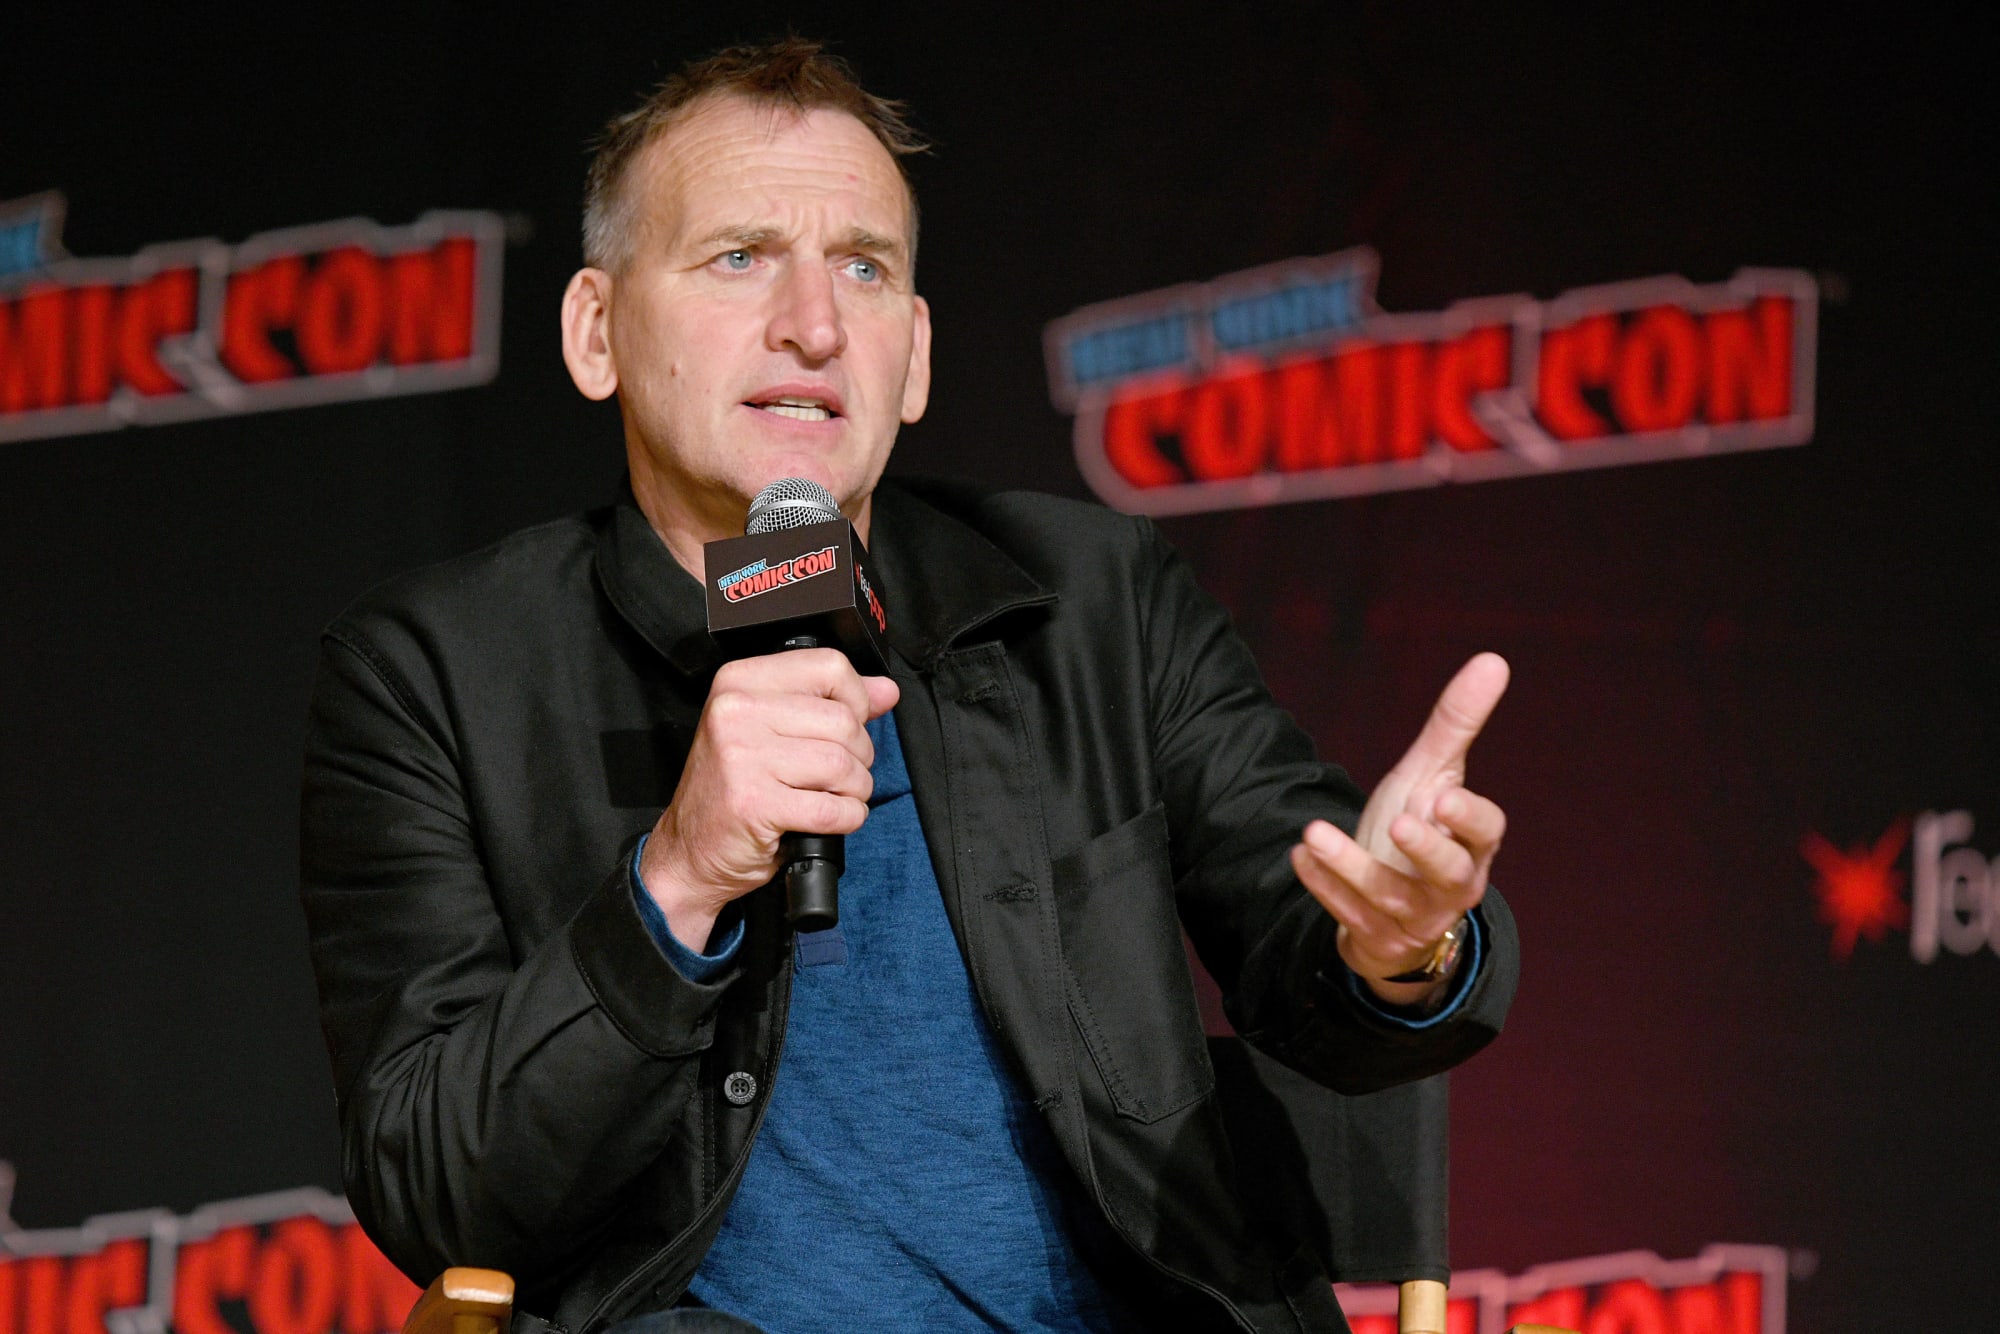 Christoper Eccleston opens up about why he left Doctor Who